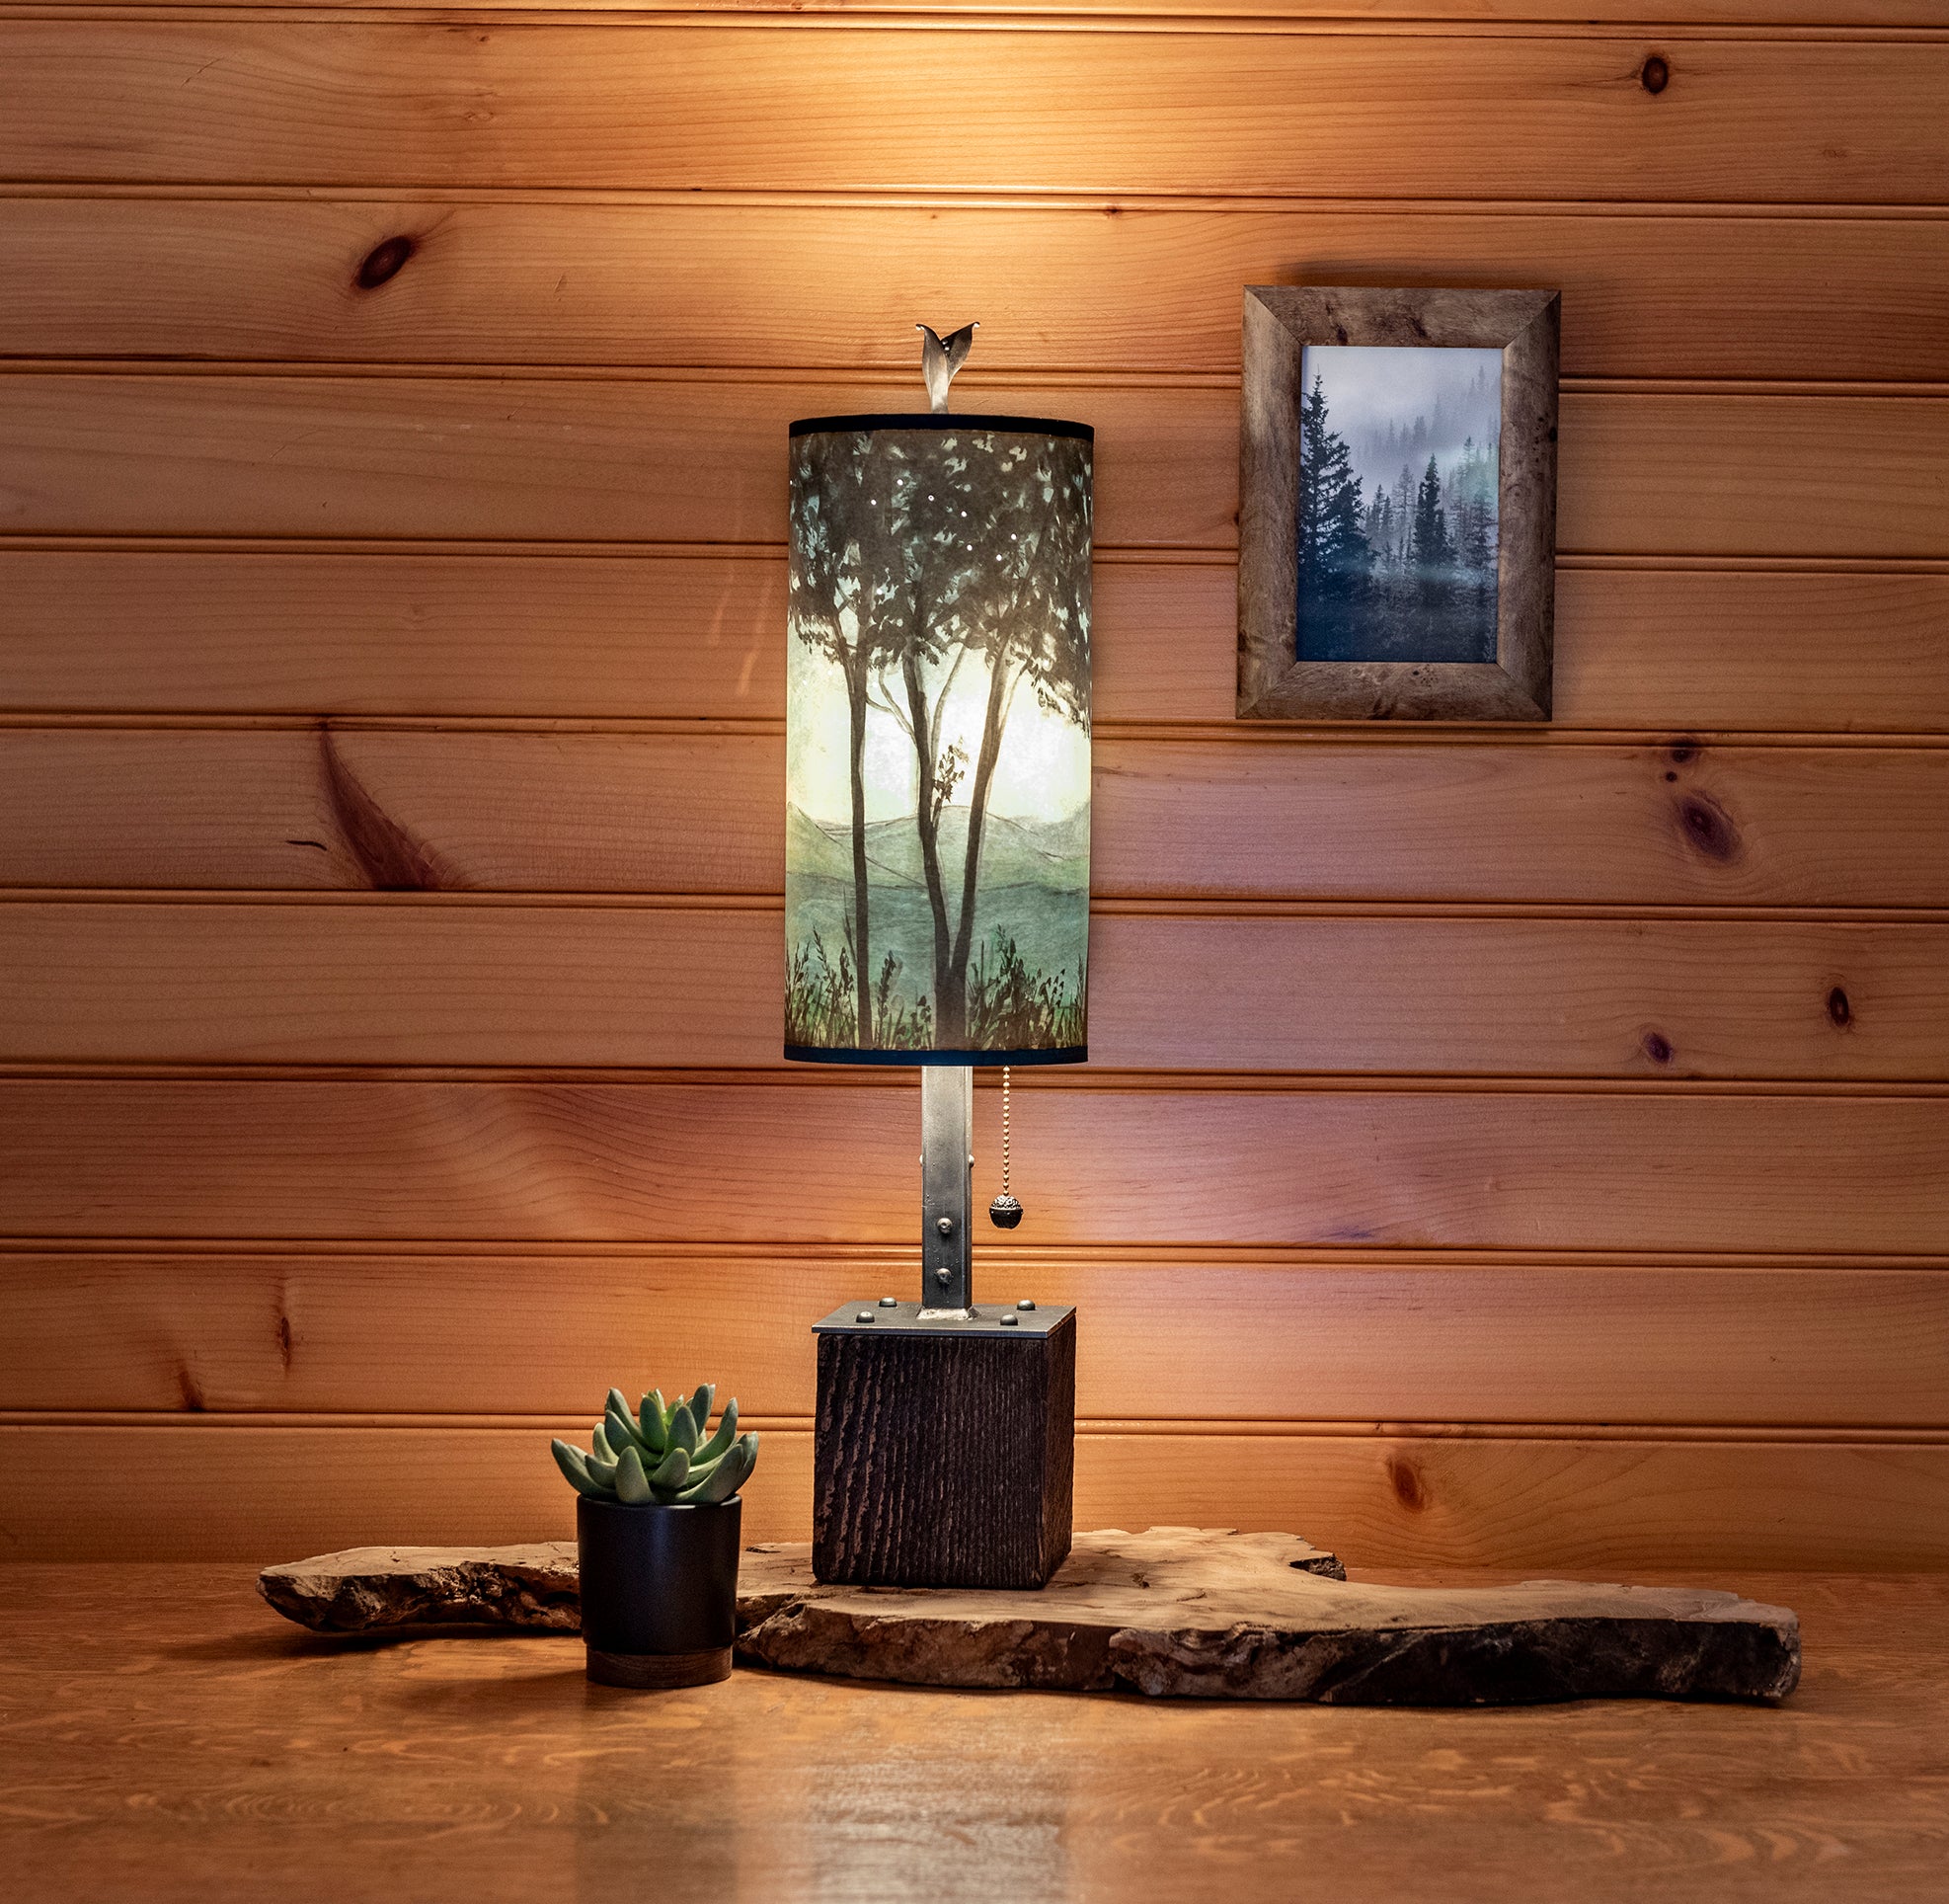 Janna Ugone & Co Table Lamp Steel Table Lamp on Reclaimed Wood with Small Tube Shade in Twilight